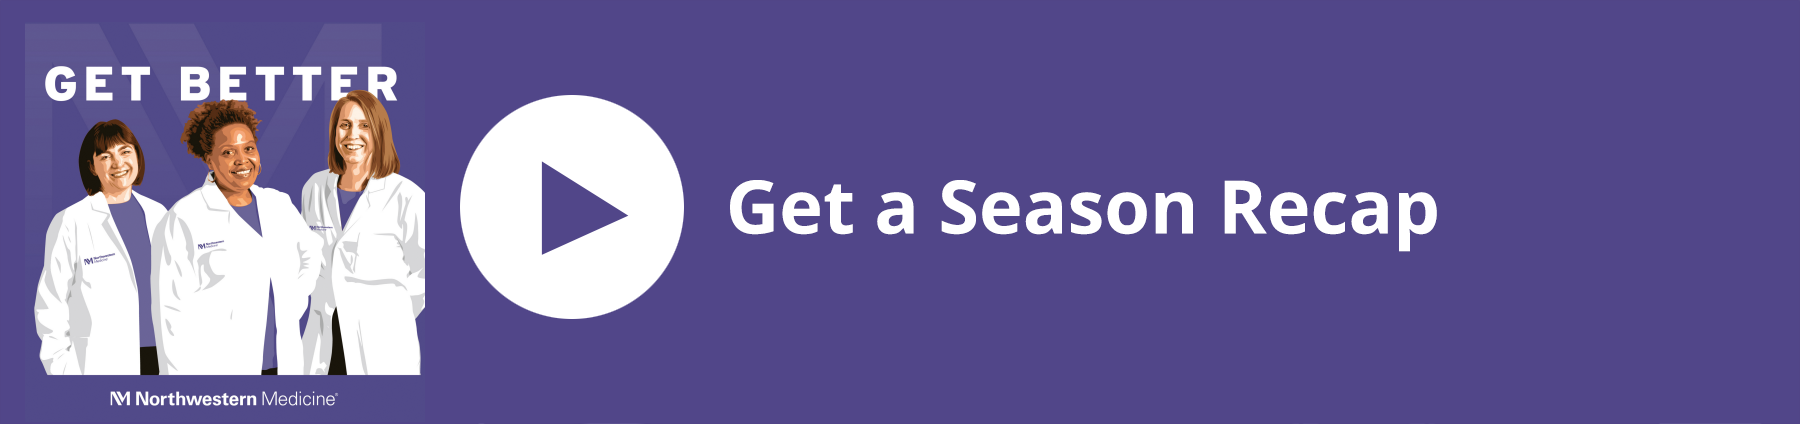 Get Better podcast player with logo, illustration of hosts, episode title: Get a Season Recap